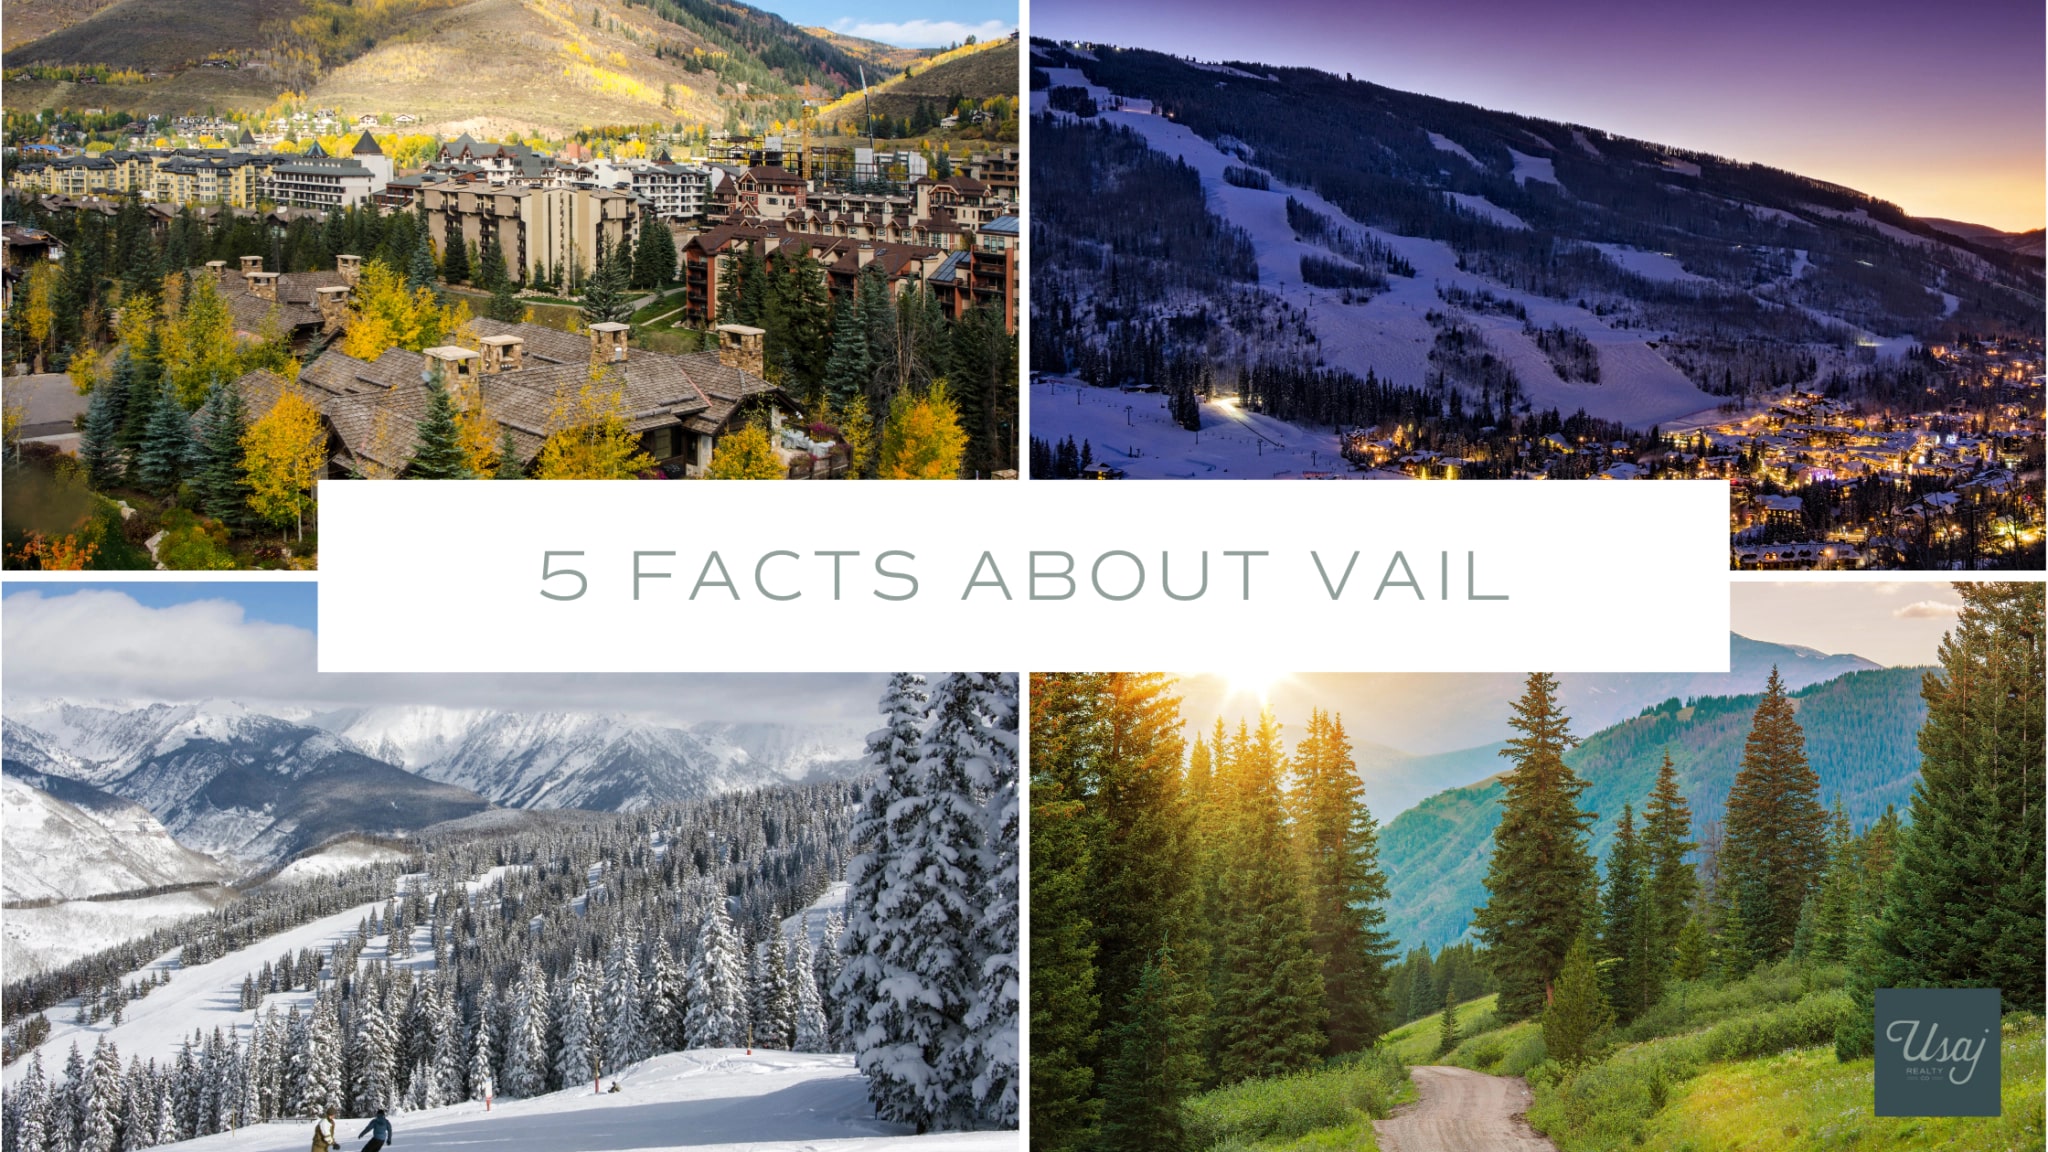 5 facts about vail